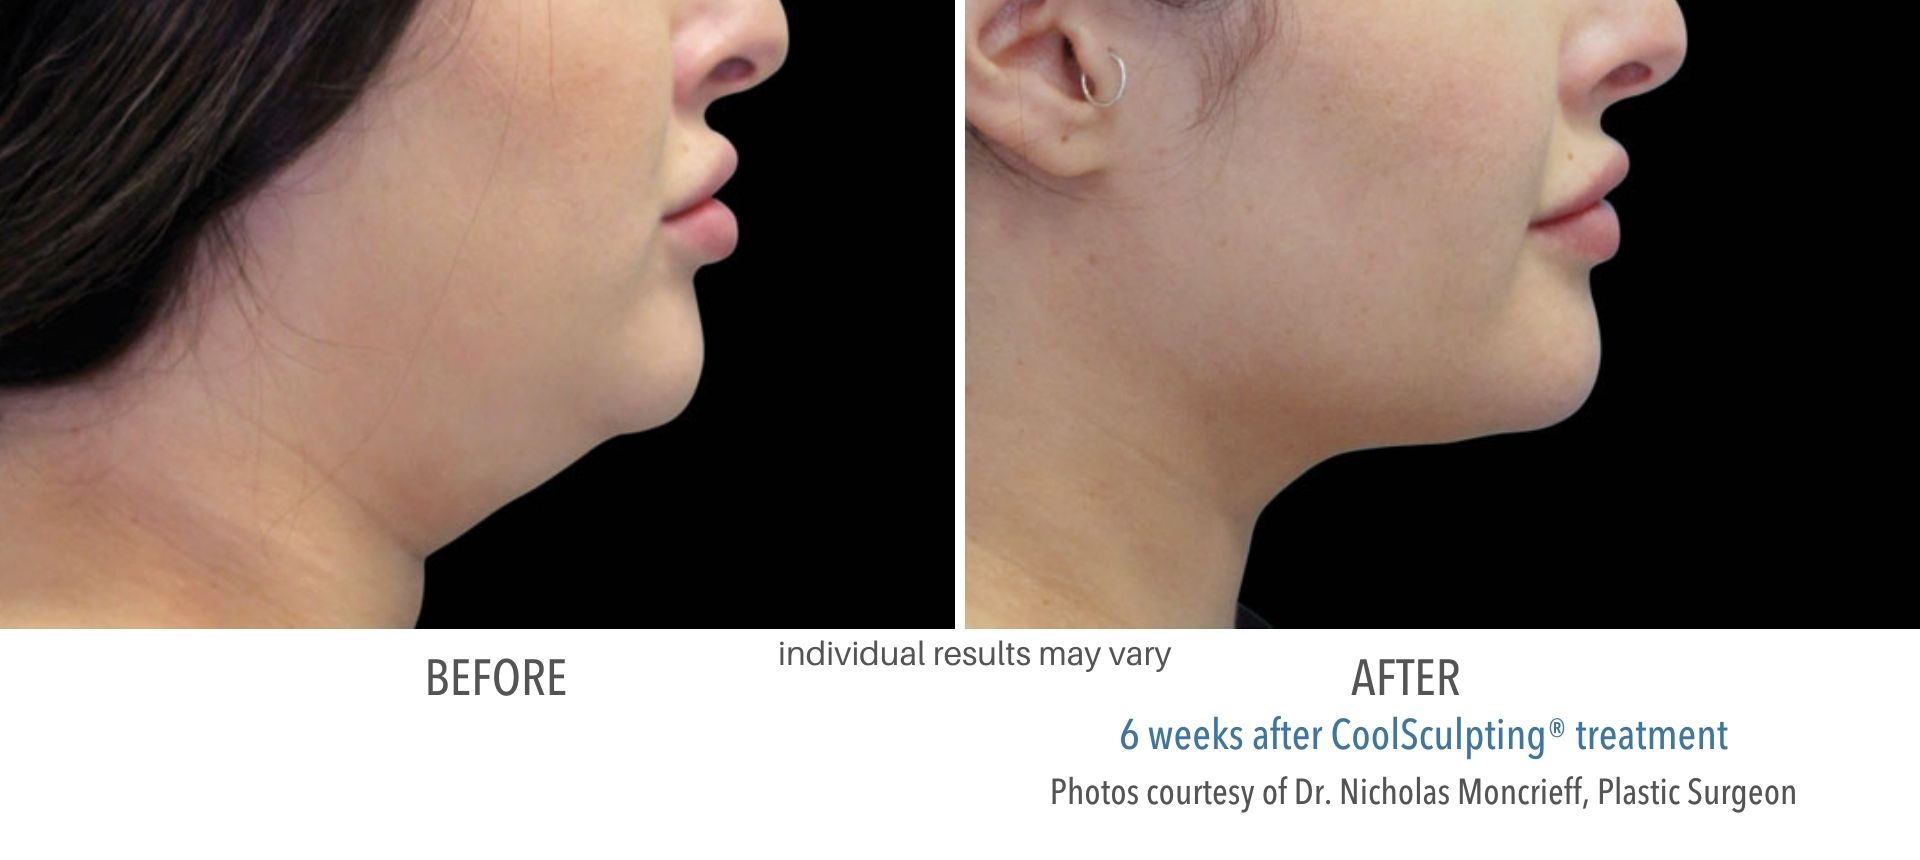 coolsculpting treatment for double chin